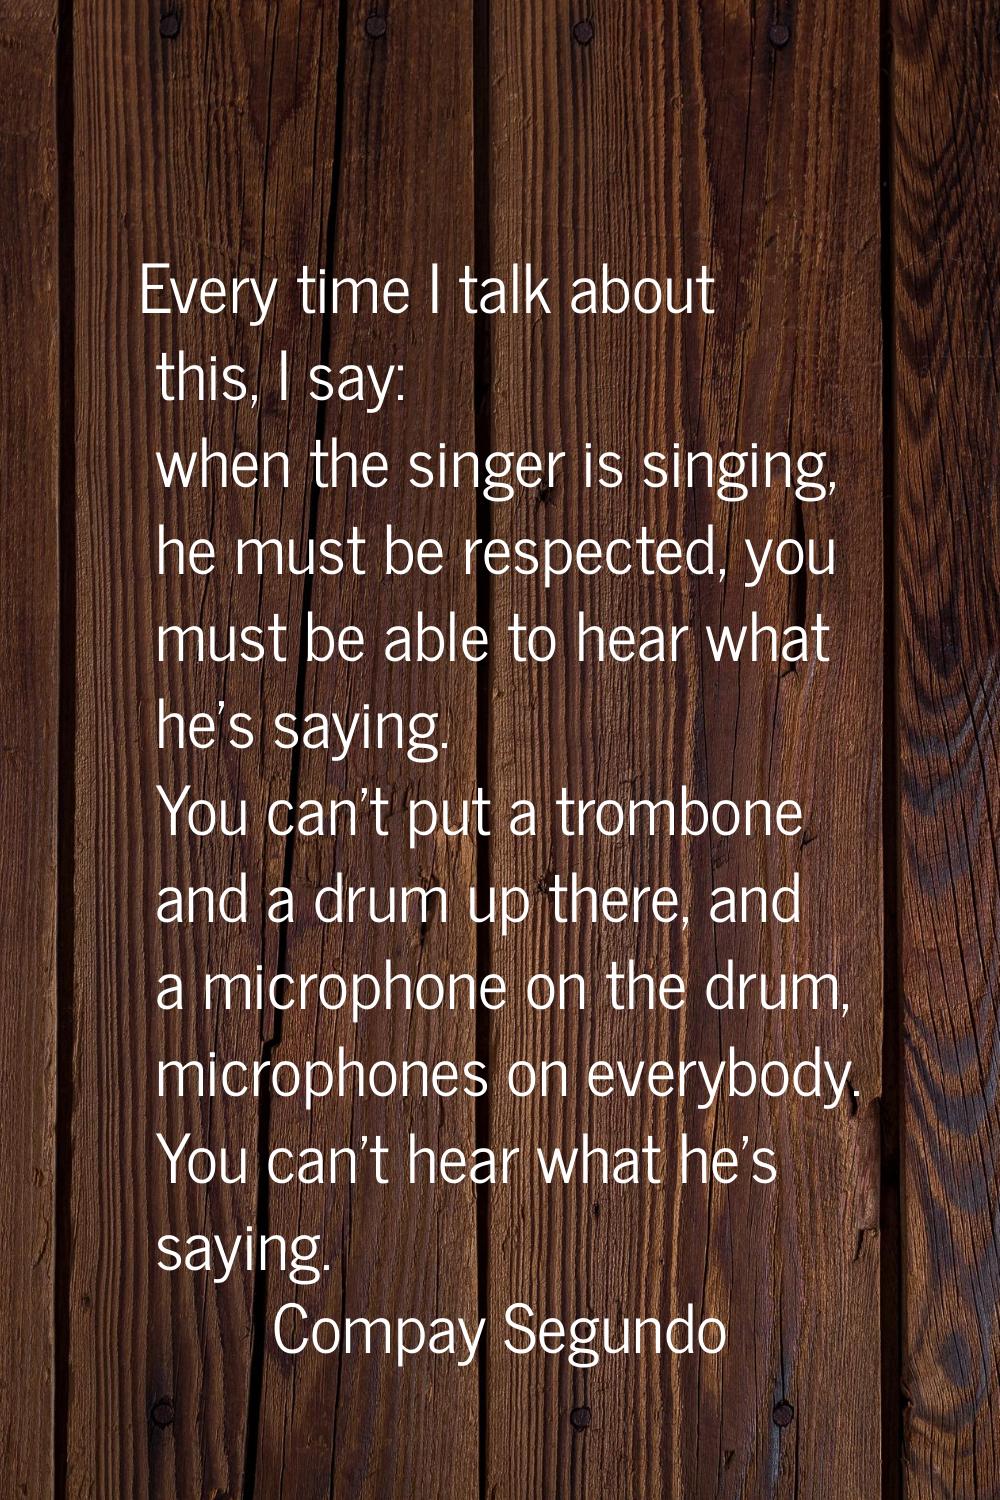 Every time I talk about this, I say: when the singer is singing, he must be respected, you must be 